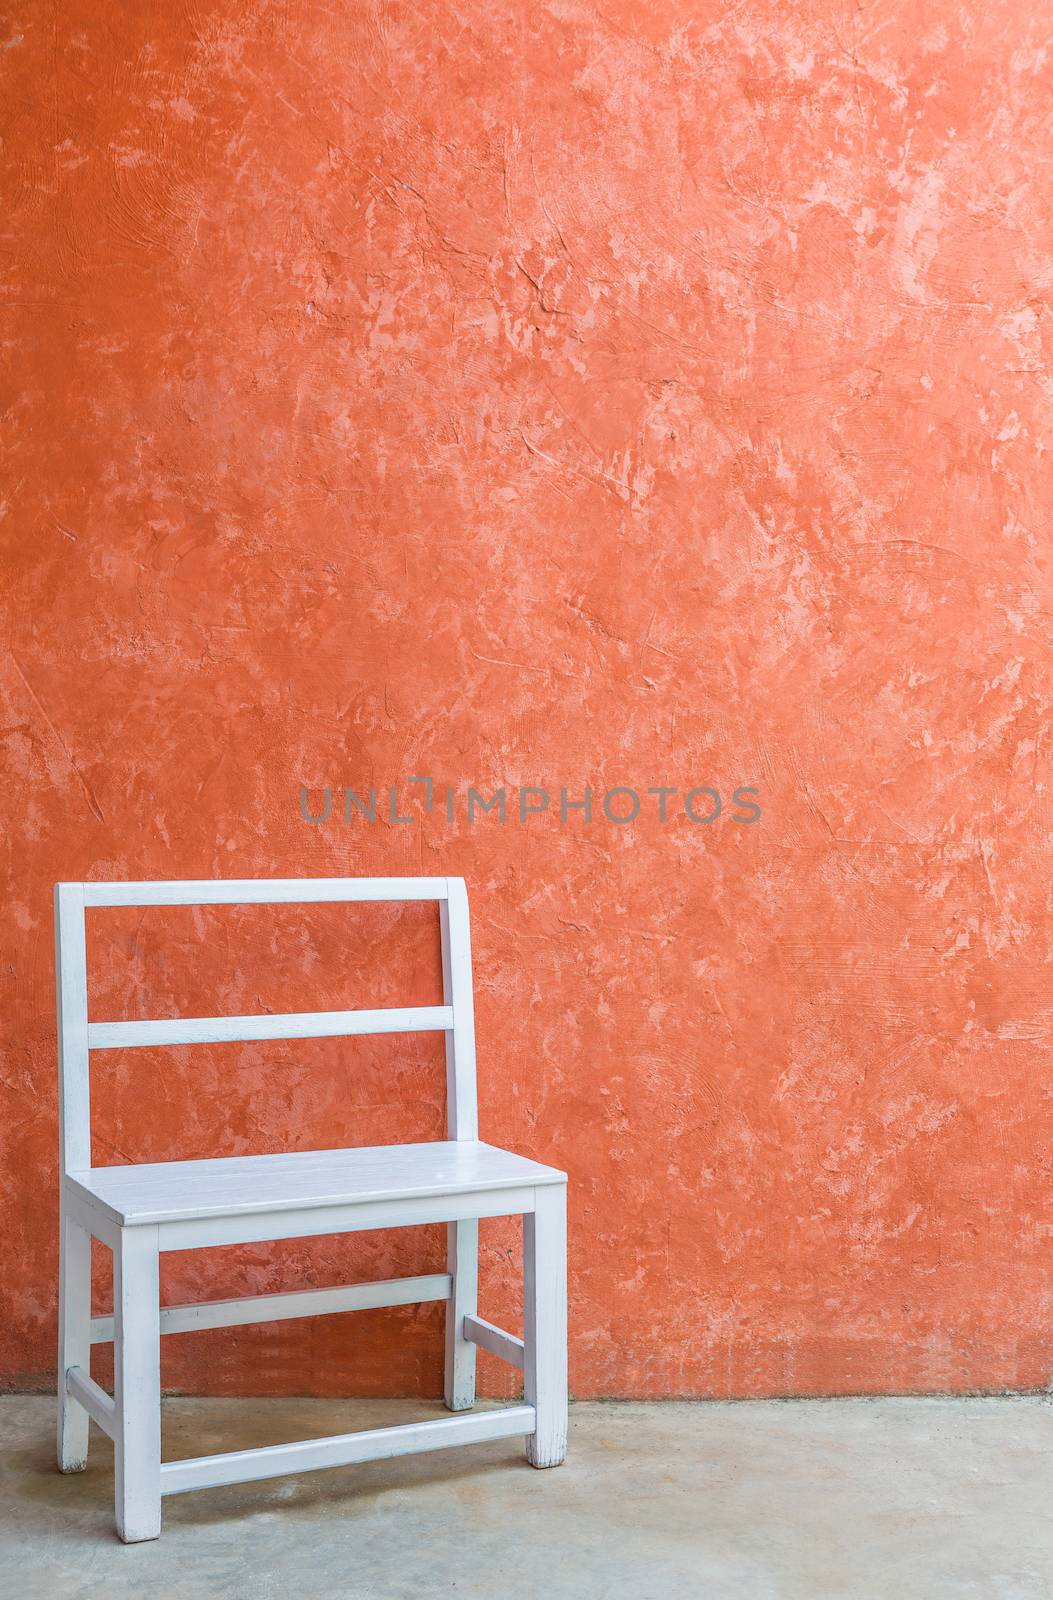 White chair and orange wall by smuay